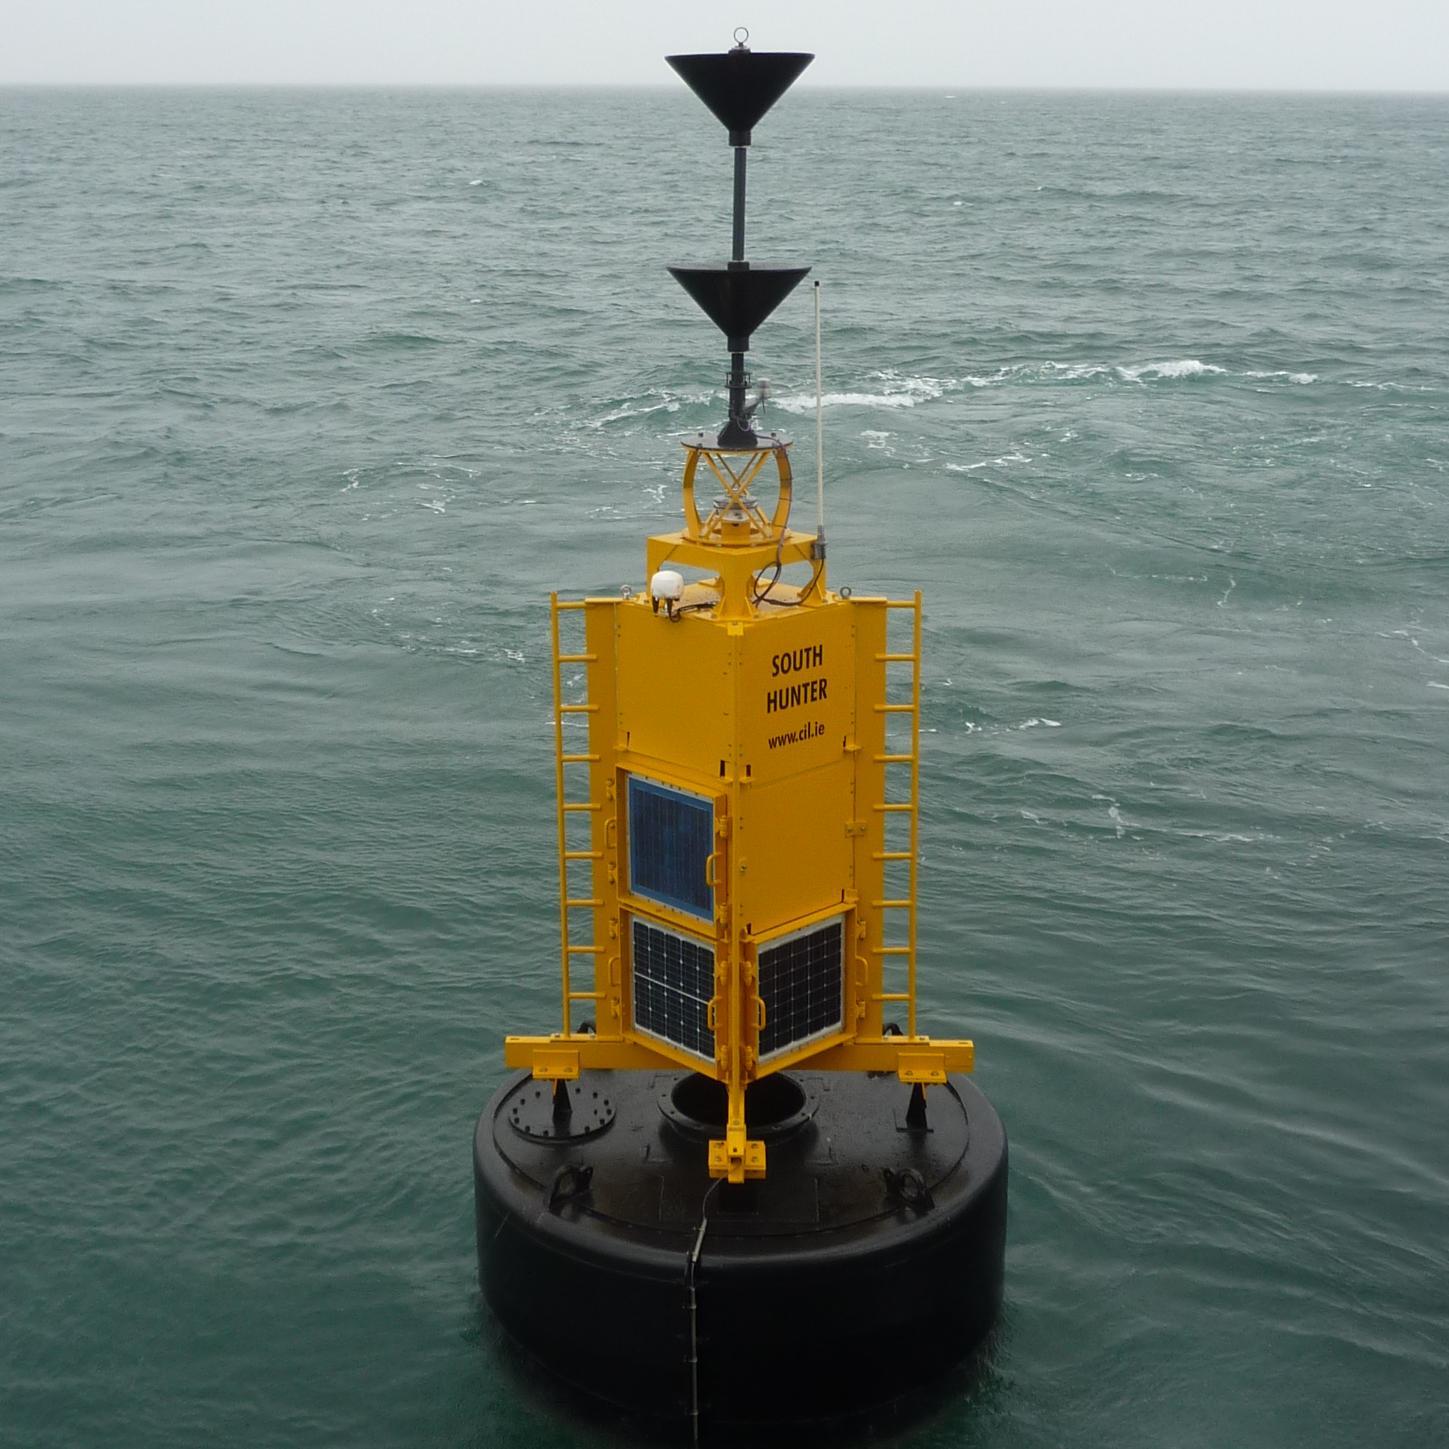 The South Hunter Buoy is a Type 2 South Cardinal Mark located off Larne. It also monitors local weather & sea state in real time. Email: metocean@irishlights.ie